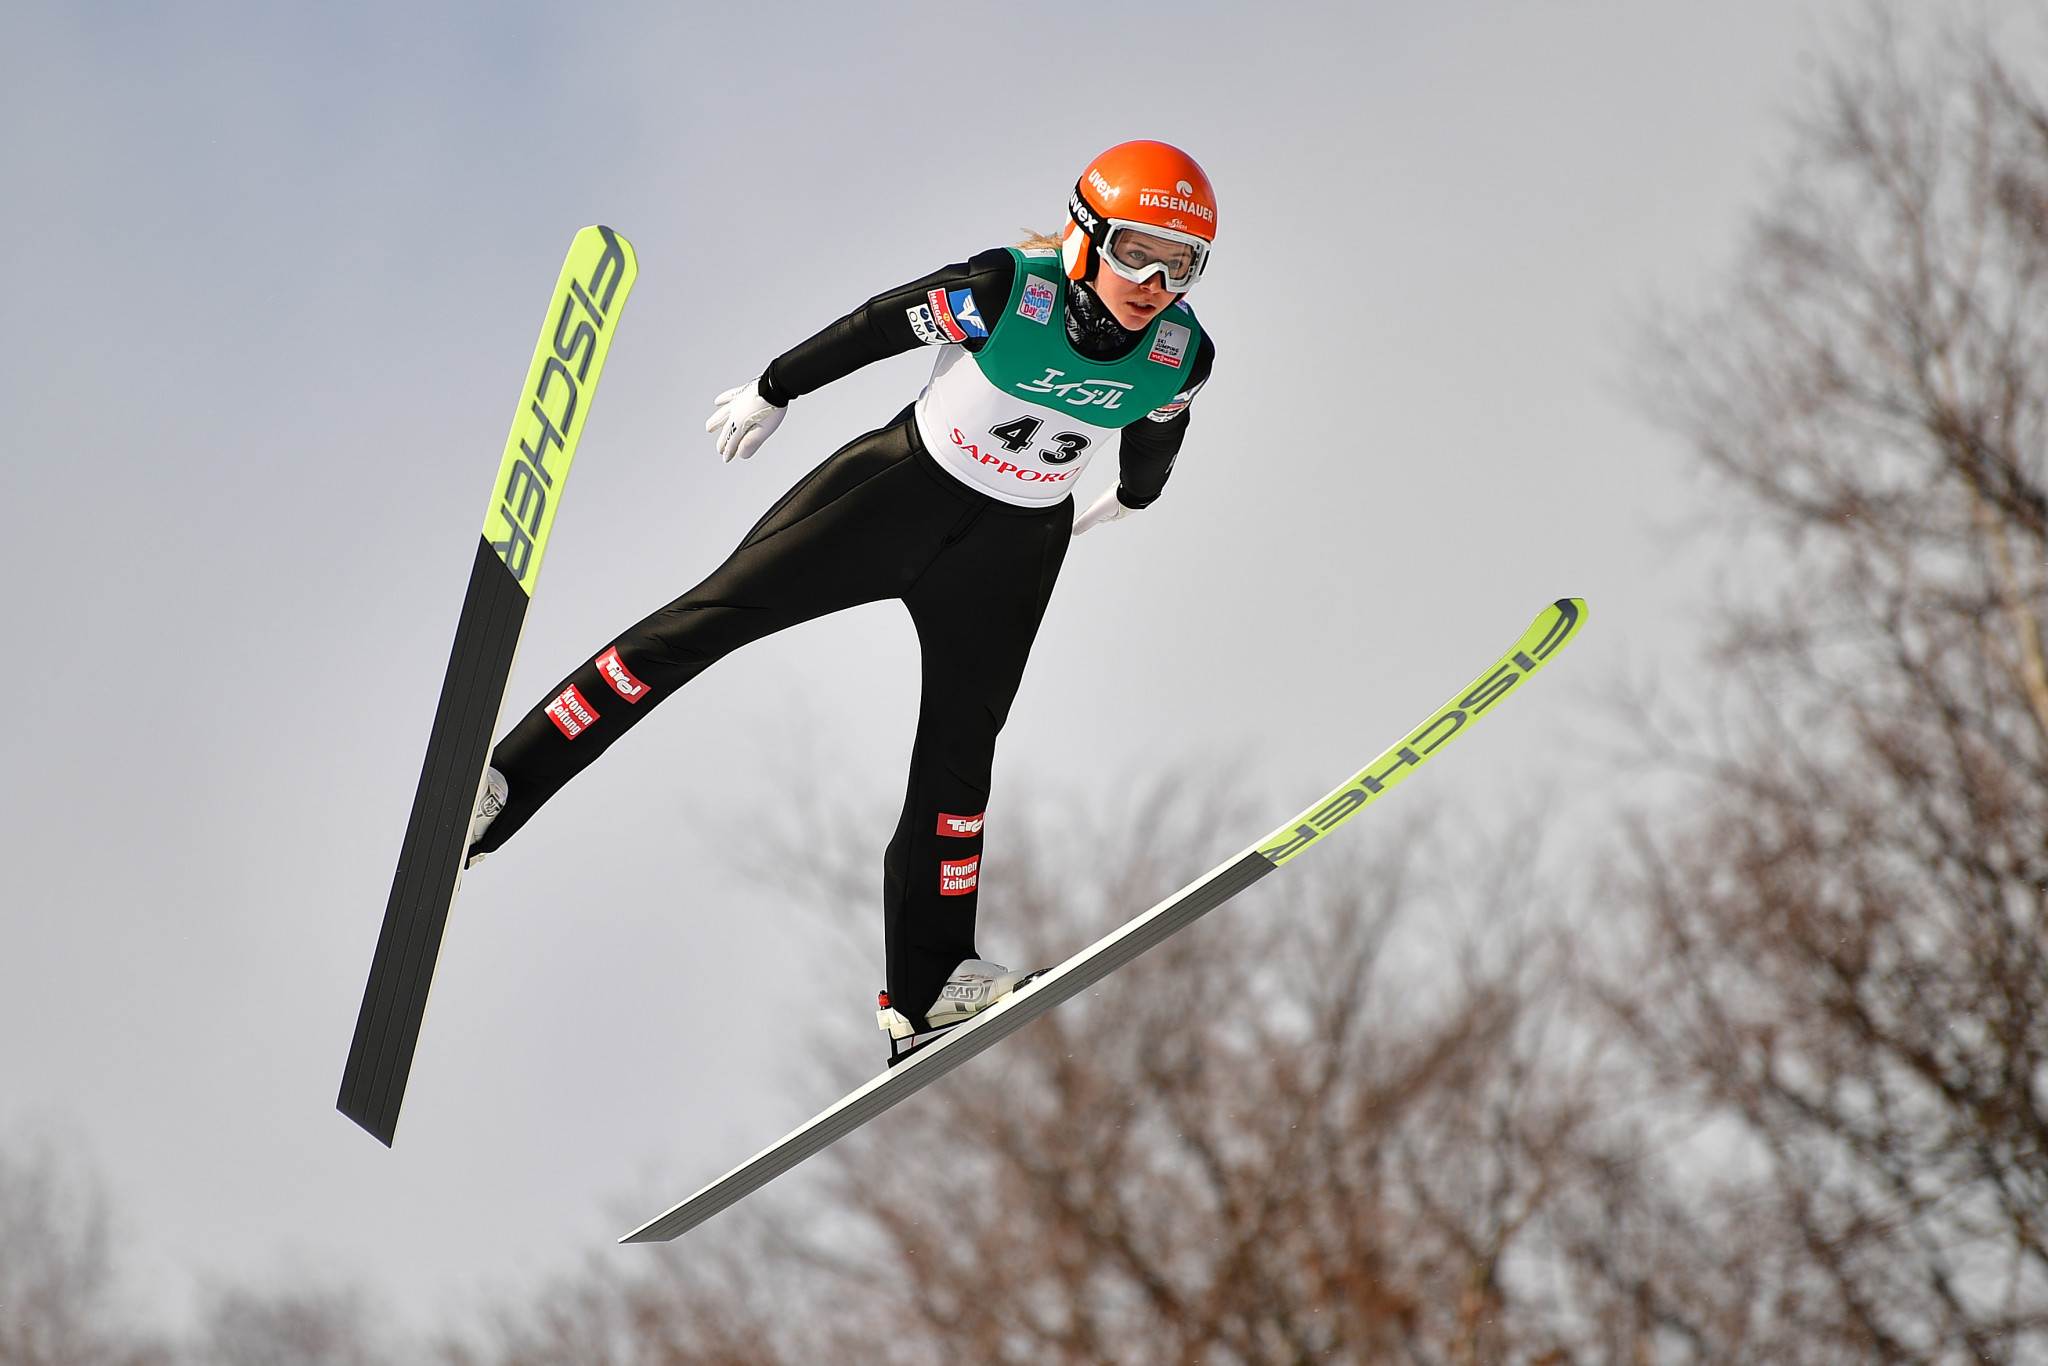 Marita Kramer of Austria topped the qualifying event at the FIS Ski Jumping World Cup event in Zao ©Getty Images